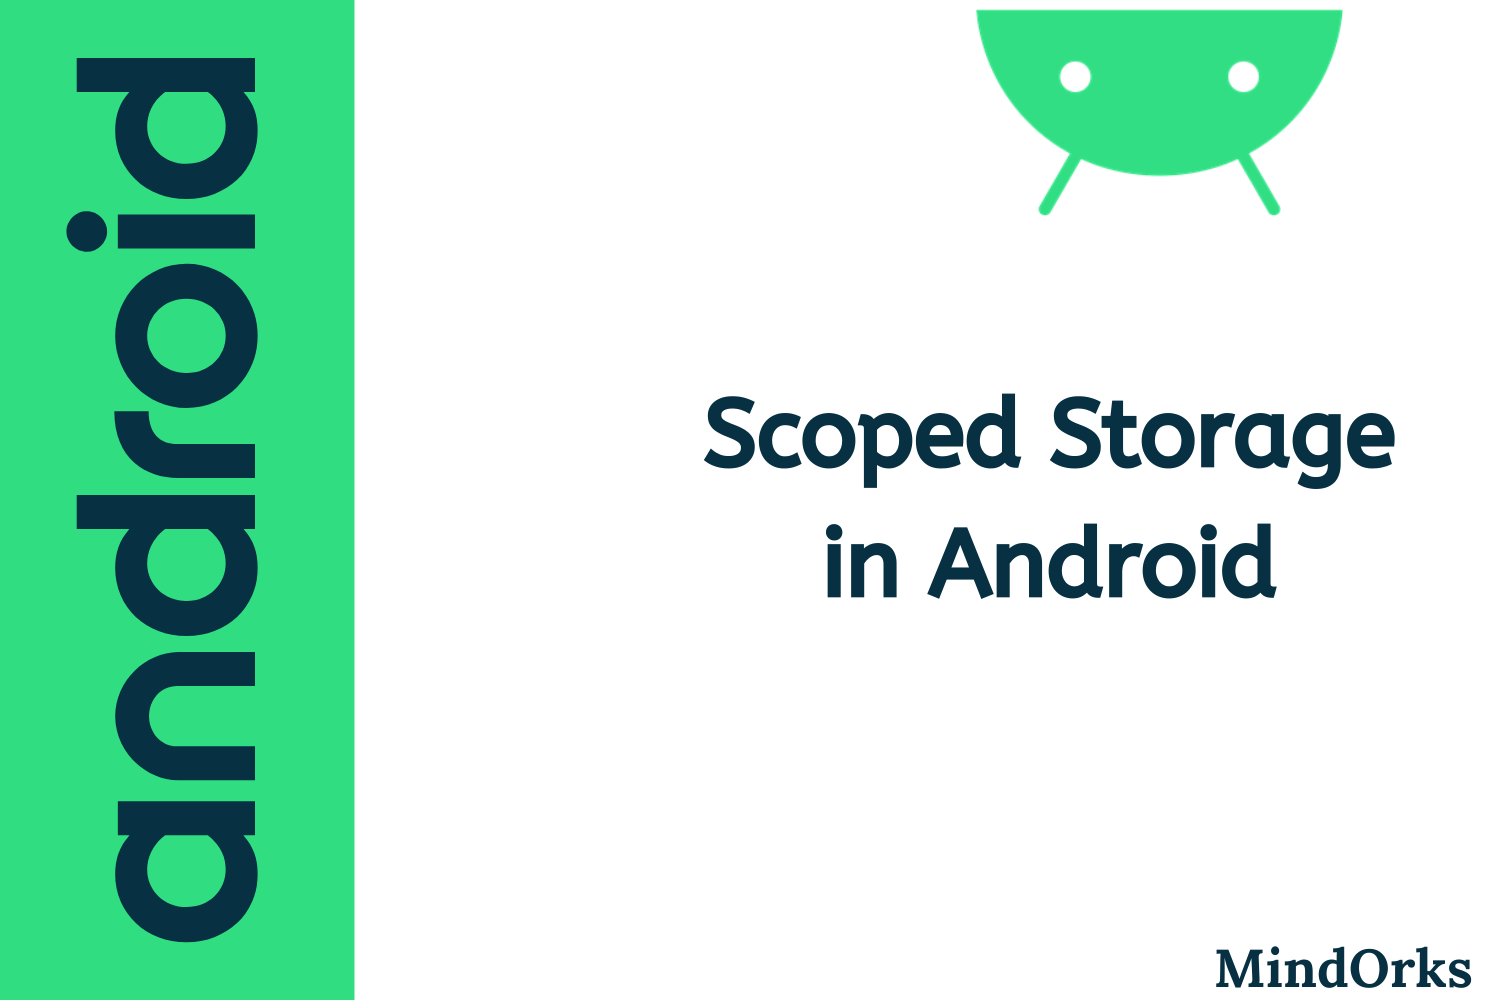 Understanding the Scoped Storage in Android